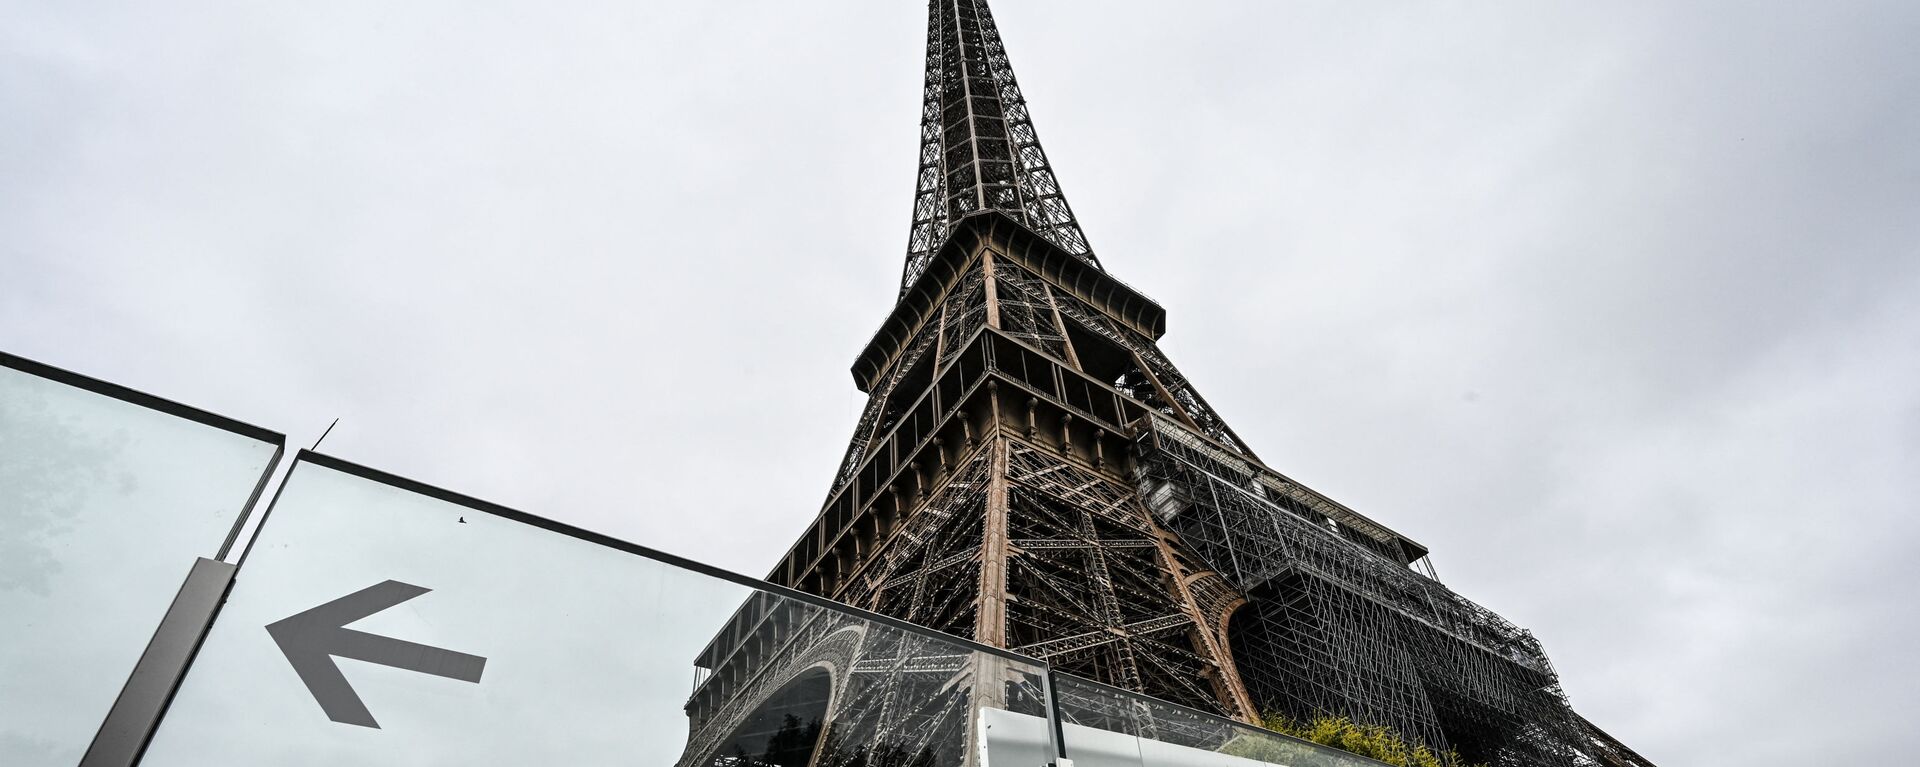 This picture taken on July 16, 2021, in Paris shows the Eiffel Tower and its protective wall. - The Eiffel Tower reopened to visitors on July 16, 2021, after nine months of shutdown caused by the Covid pandemic. Up to 13,000 people per day will be allowed to take the elevators to the top and take in the views over the French capital, down from 25,000 in the pre-Covid era.  - Sputnik International, 1920